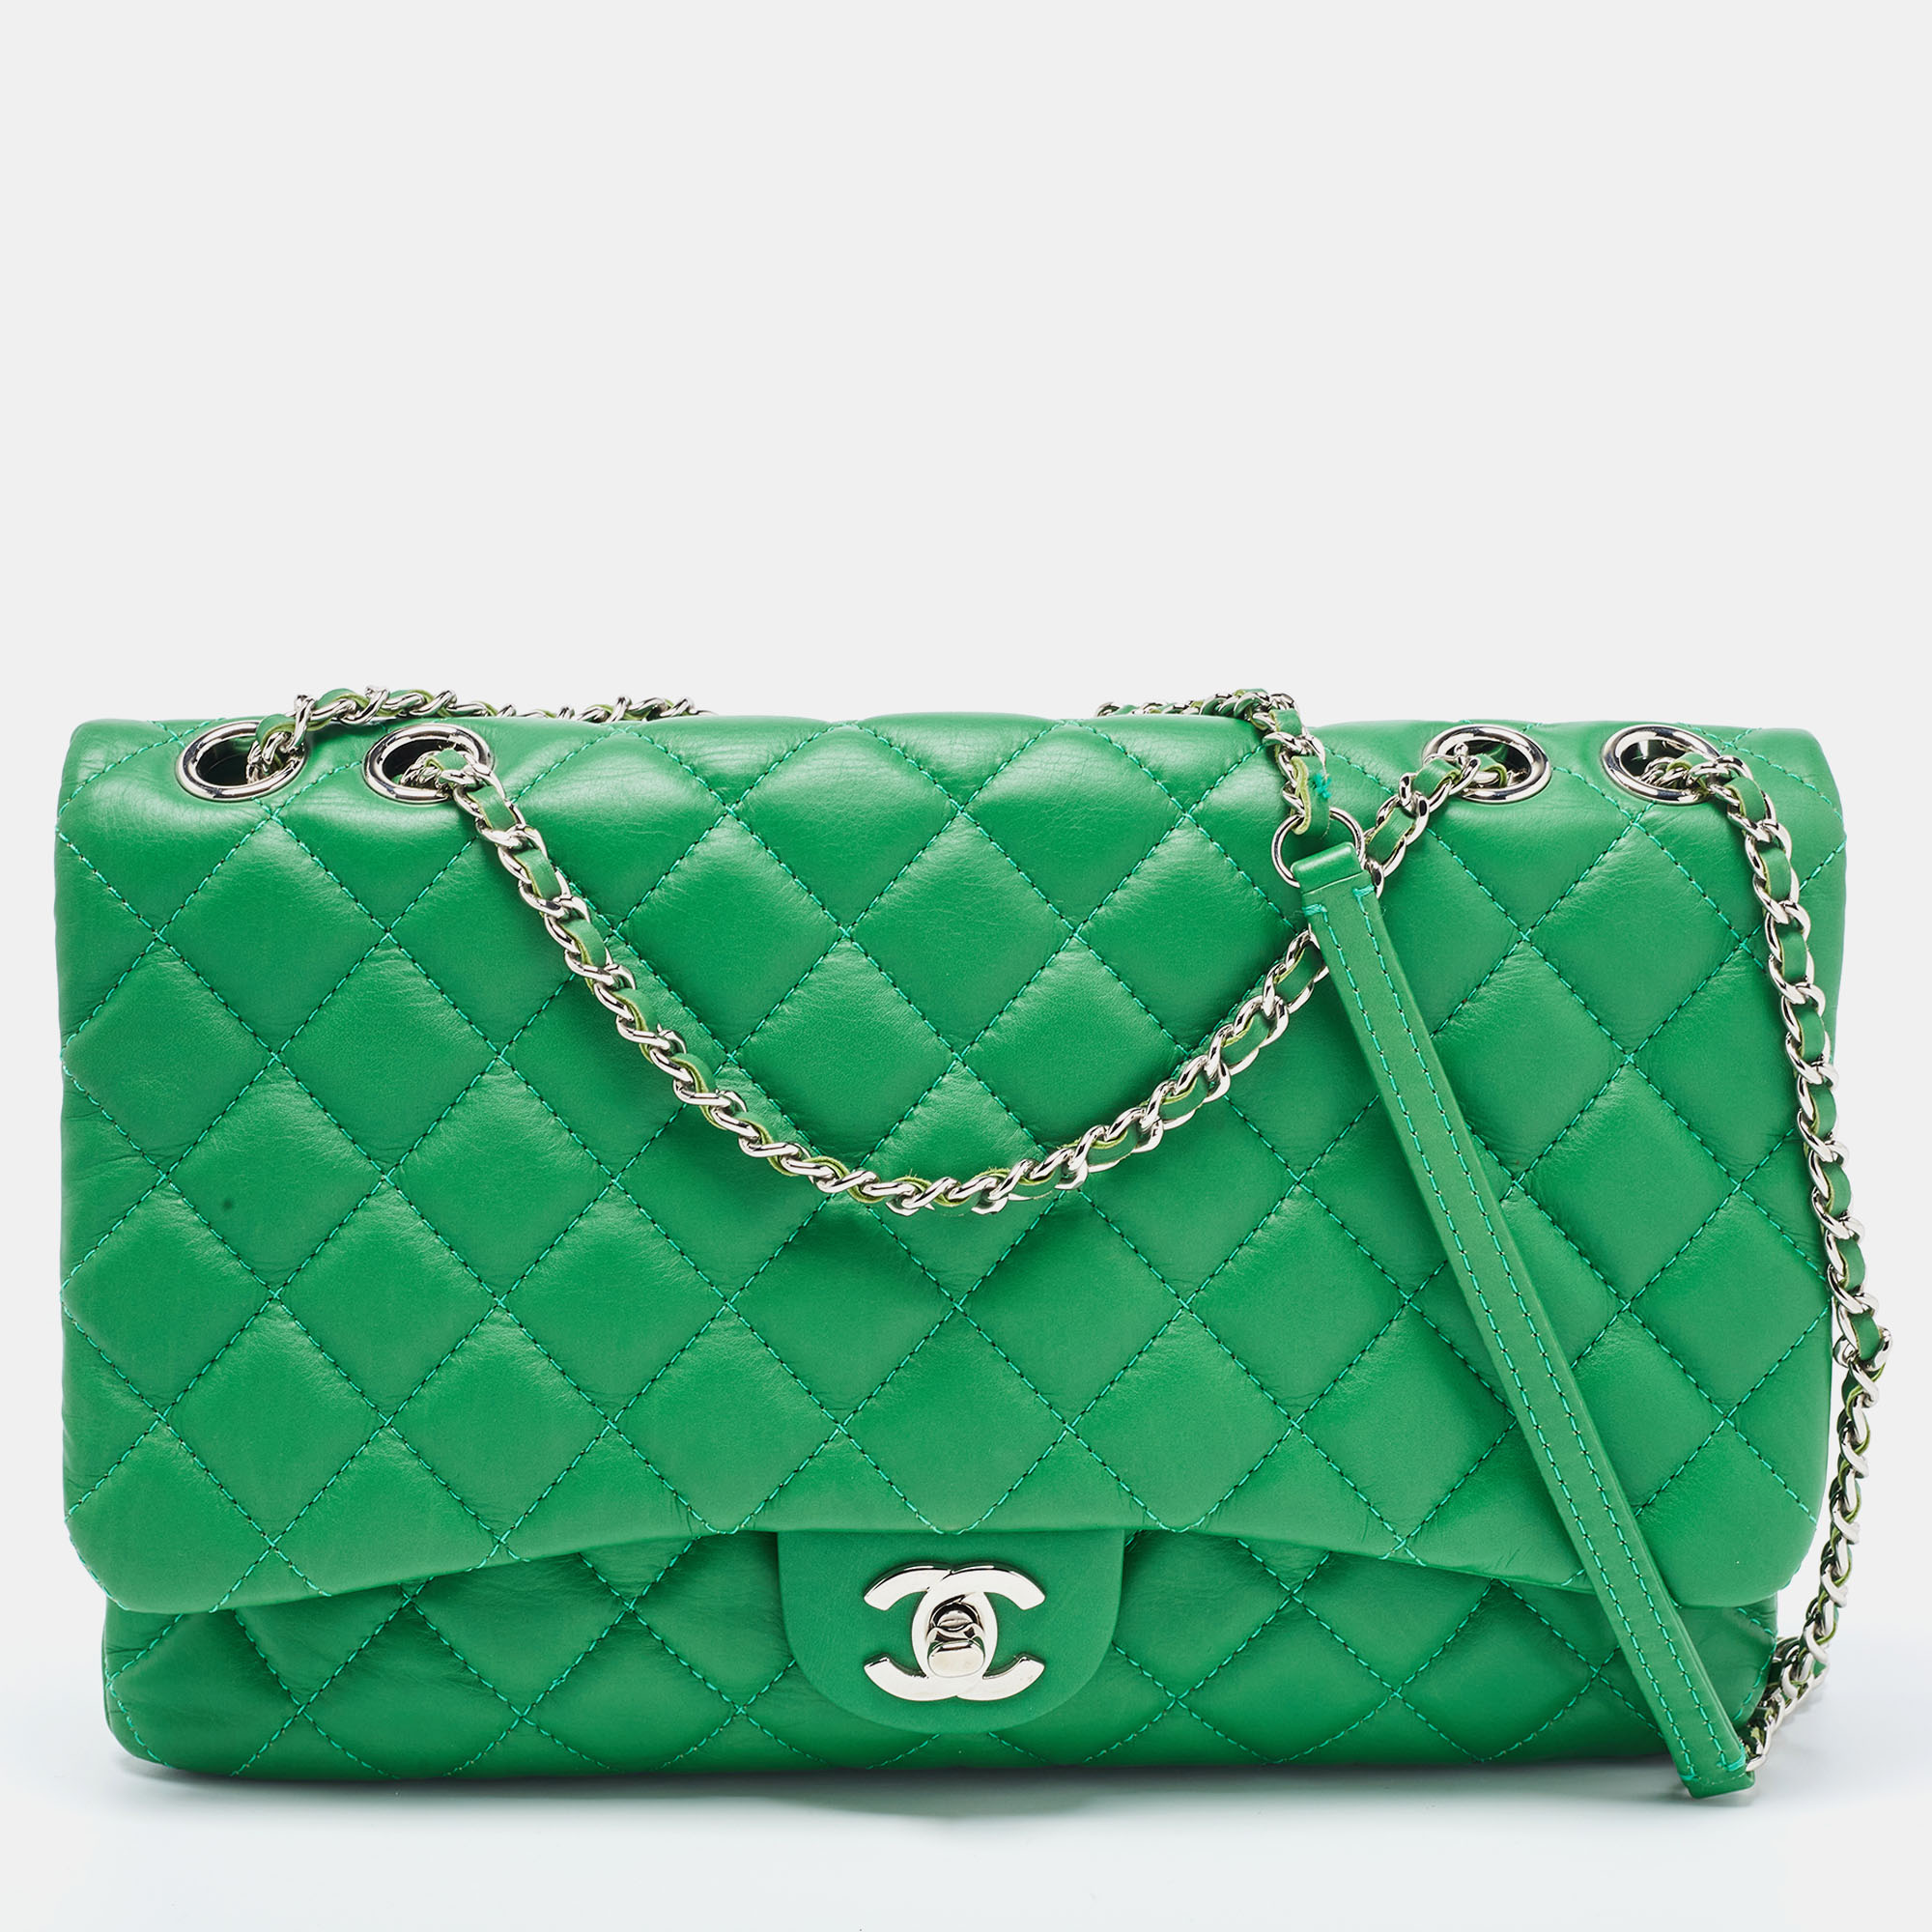 Pre Owned Chanel Bag 